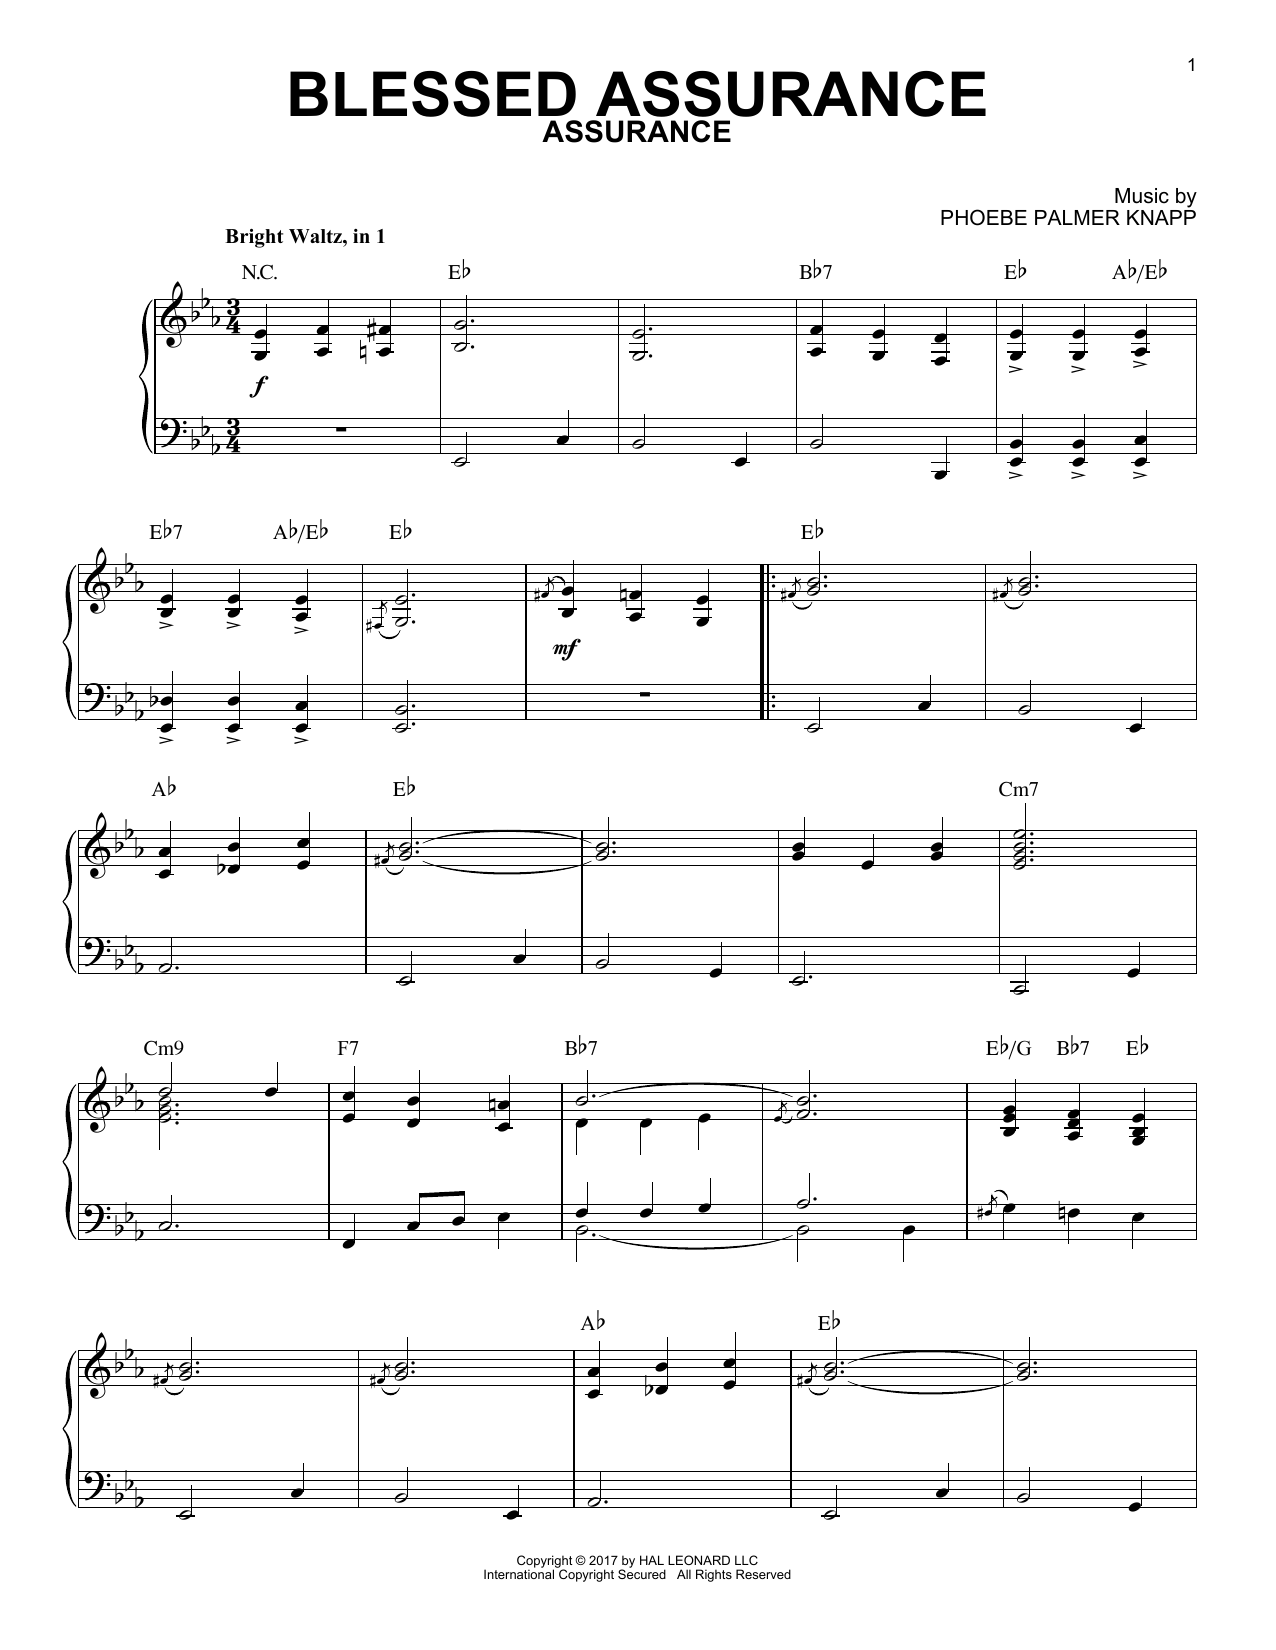 Download Fanny J. Crosby Blessed Assurance [Jazz version] Sheet Music